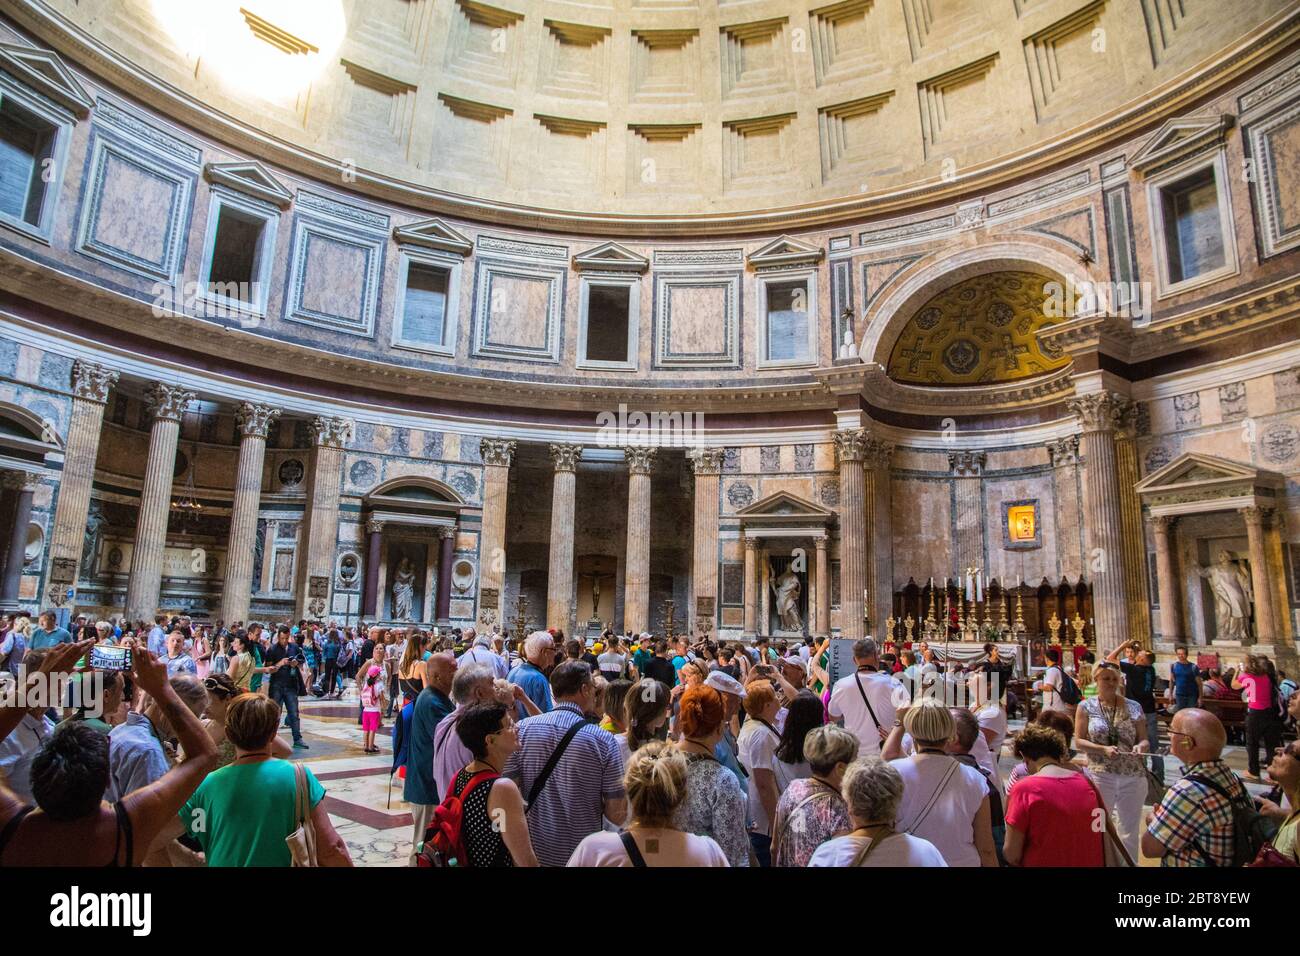 Crowds of tourists in the Pantheon in Rome Italy Stock Photo